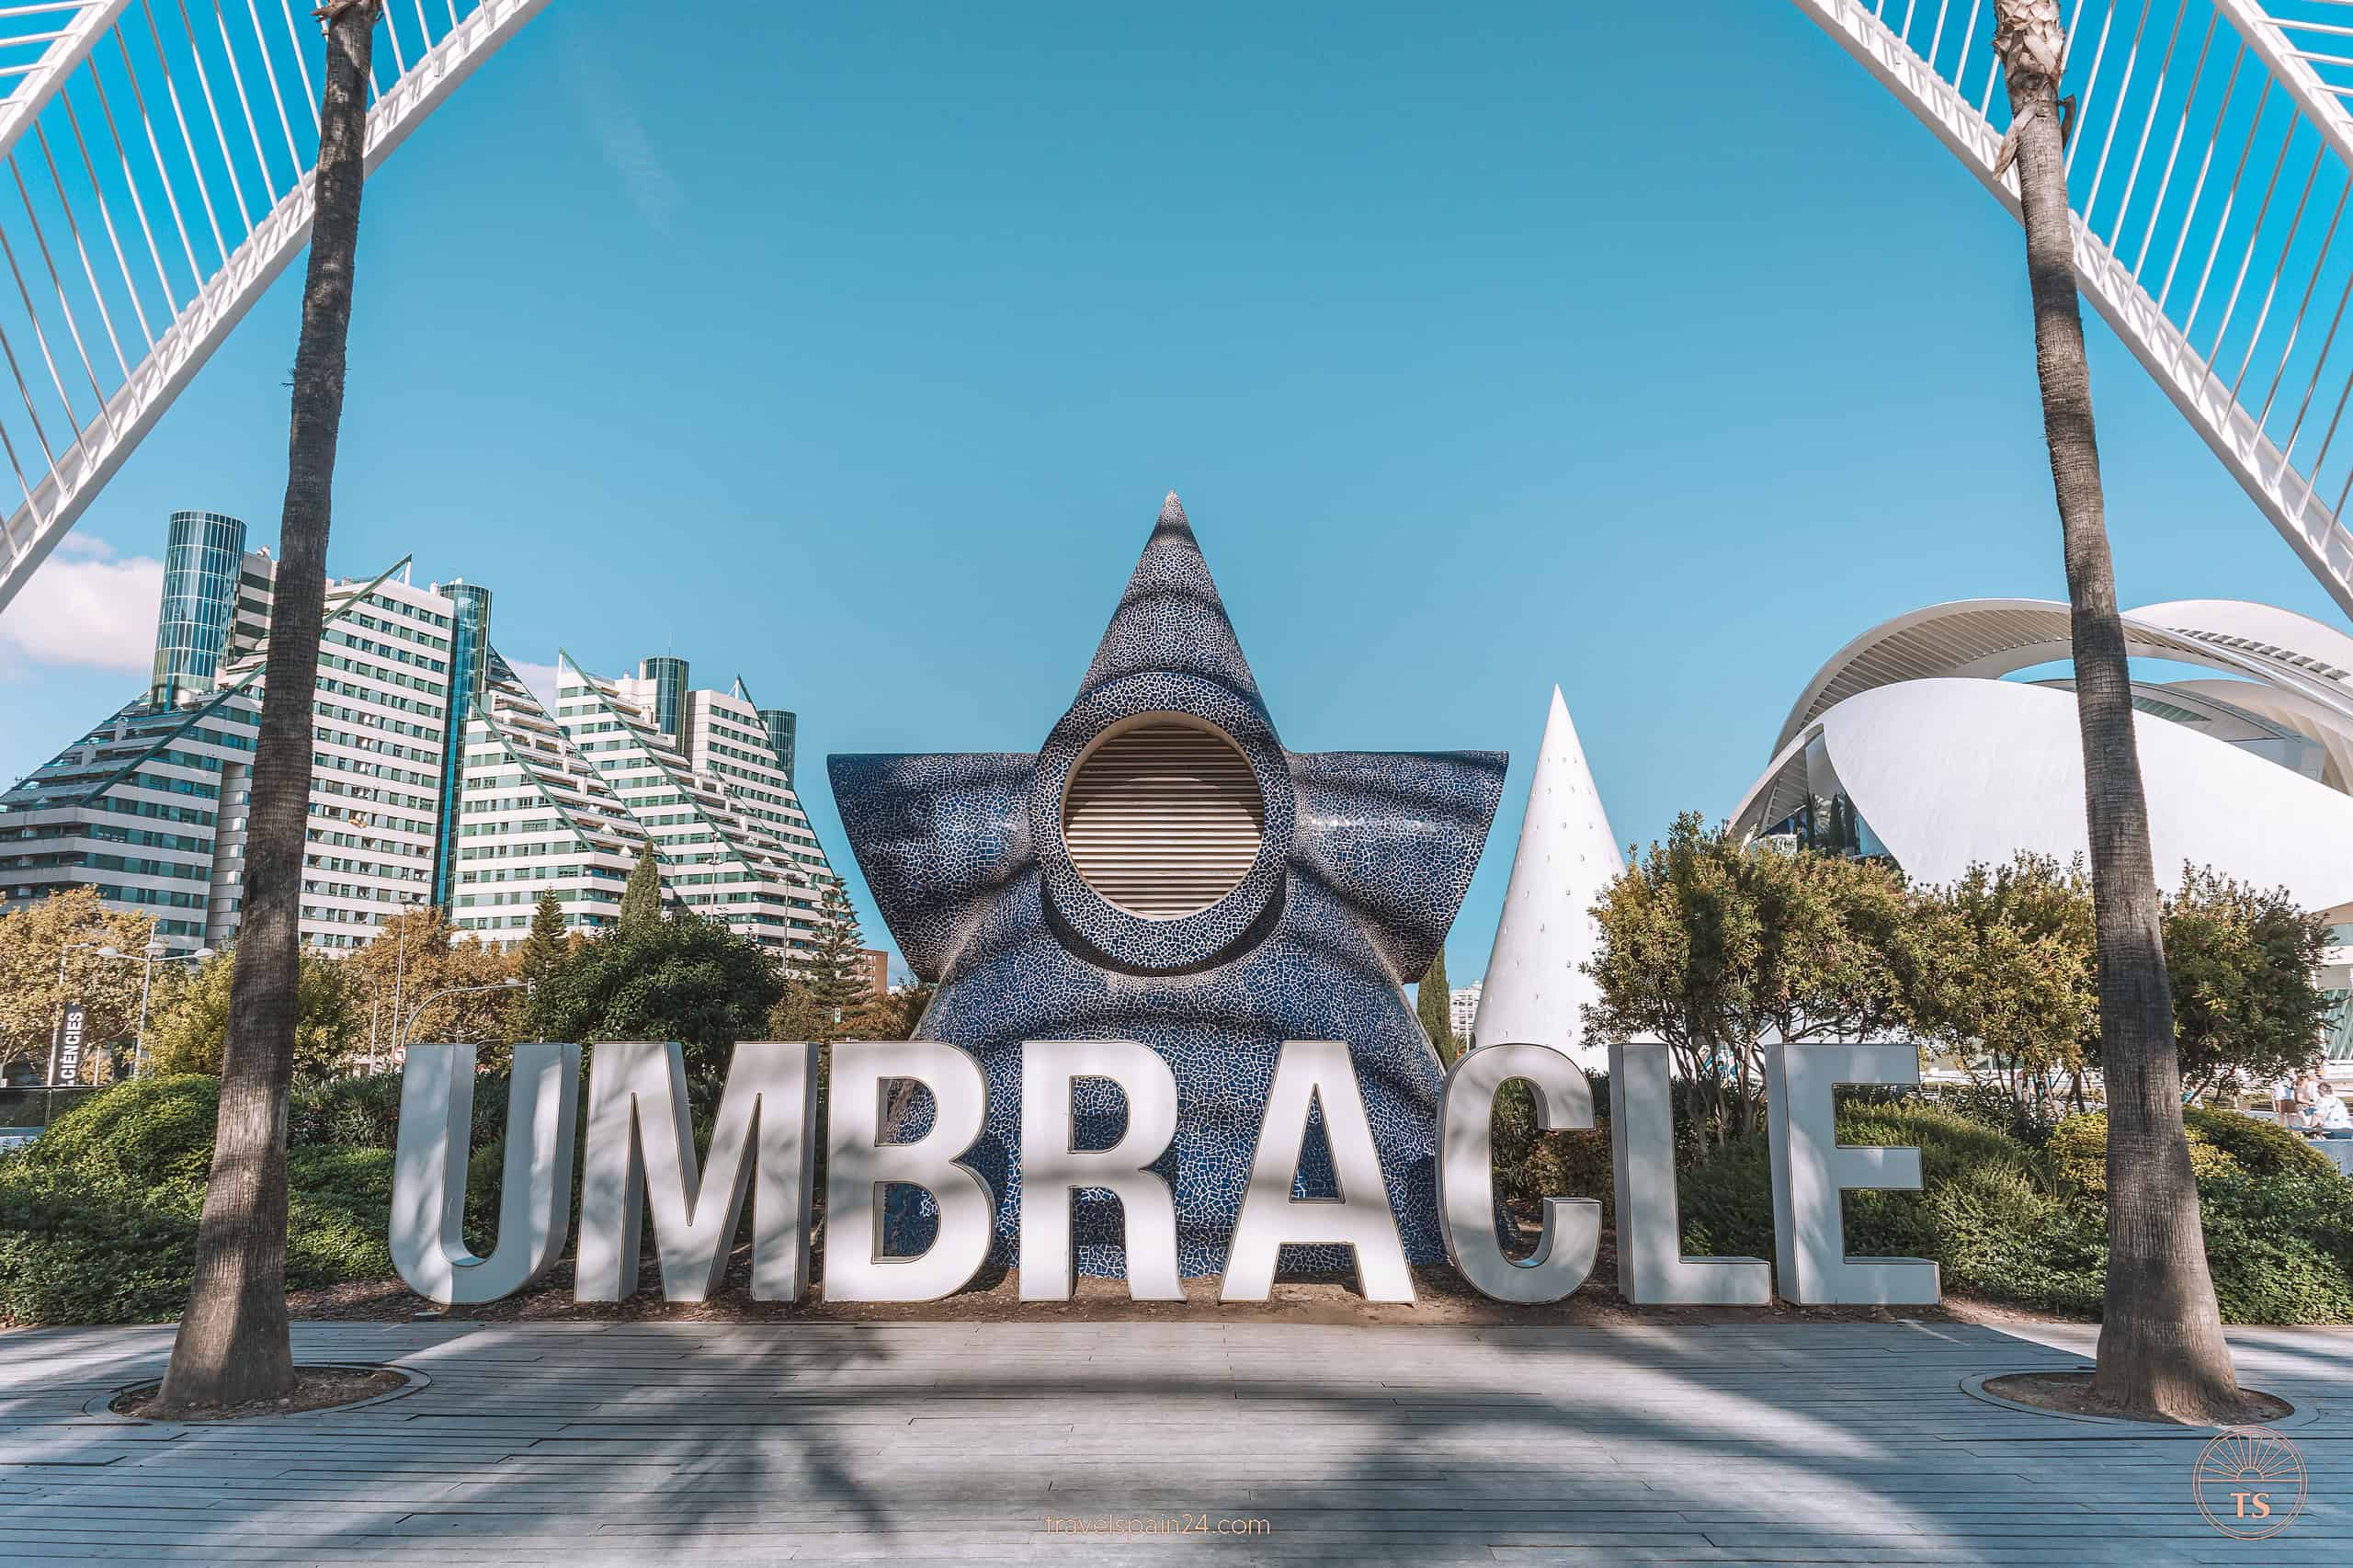 The large white UMBRACLE letters in L'umbracle Gardens, Valencia, with a backdrop featuring a large blue starfish sculpture and a glimpse of Palau de les Arts, highlighting the artistic flair of the area.